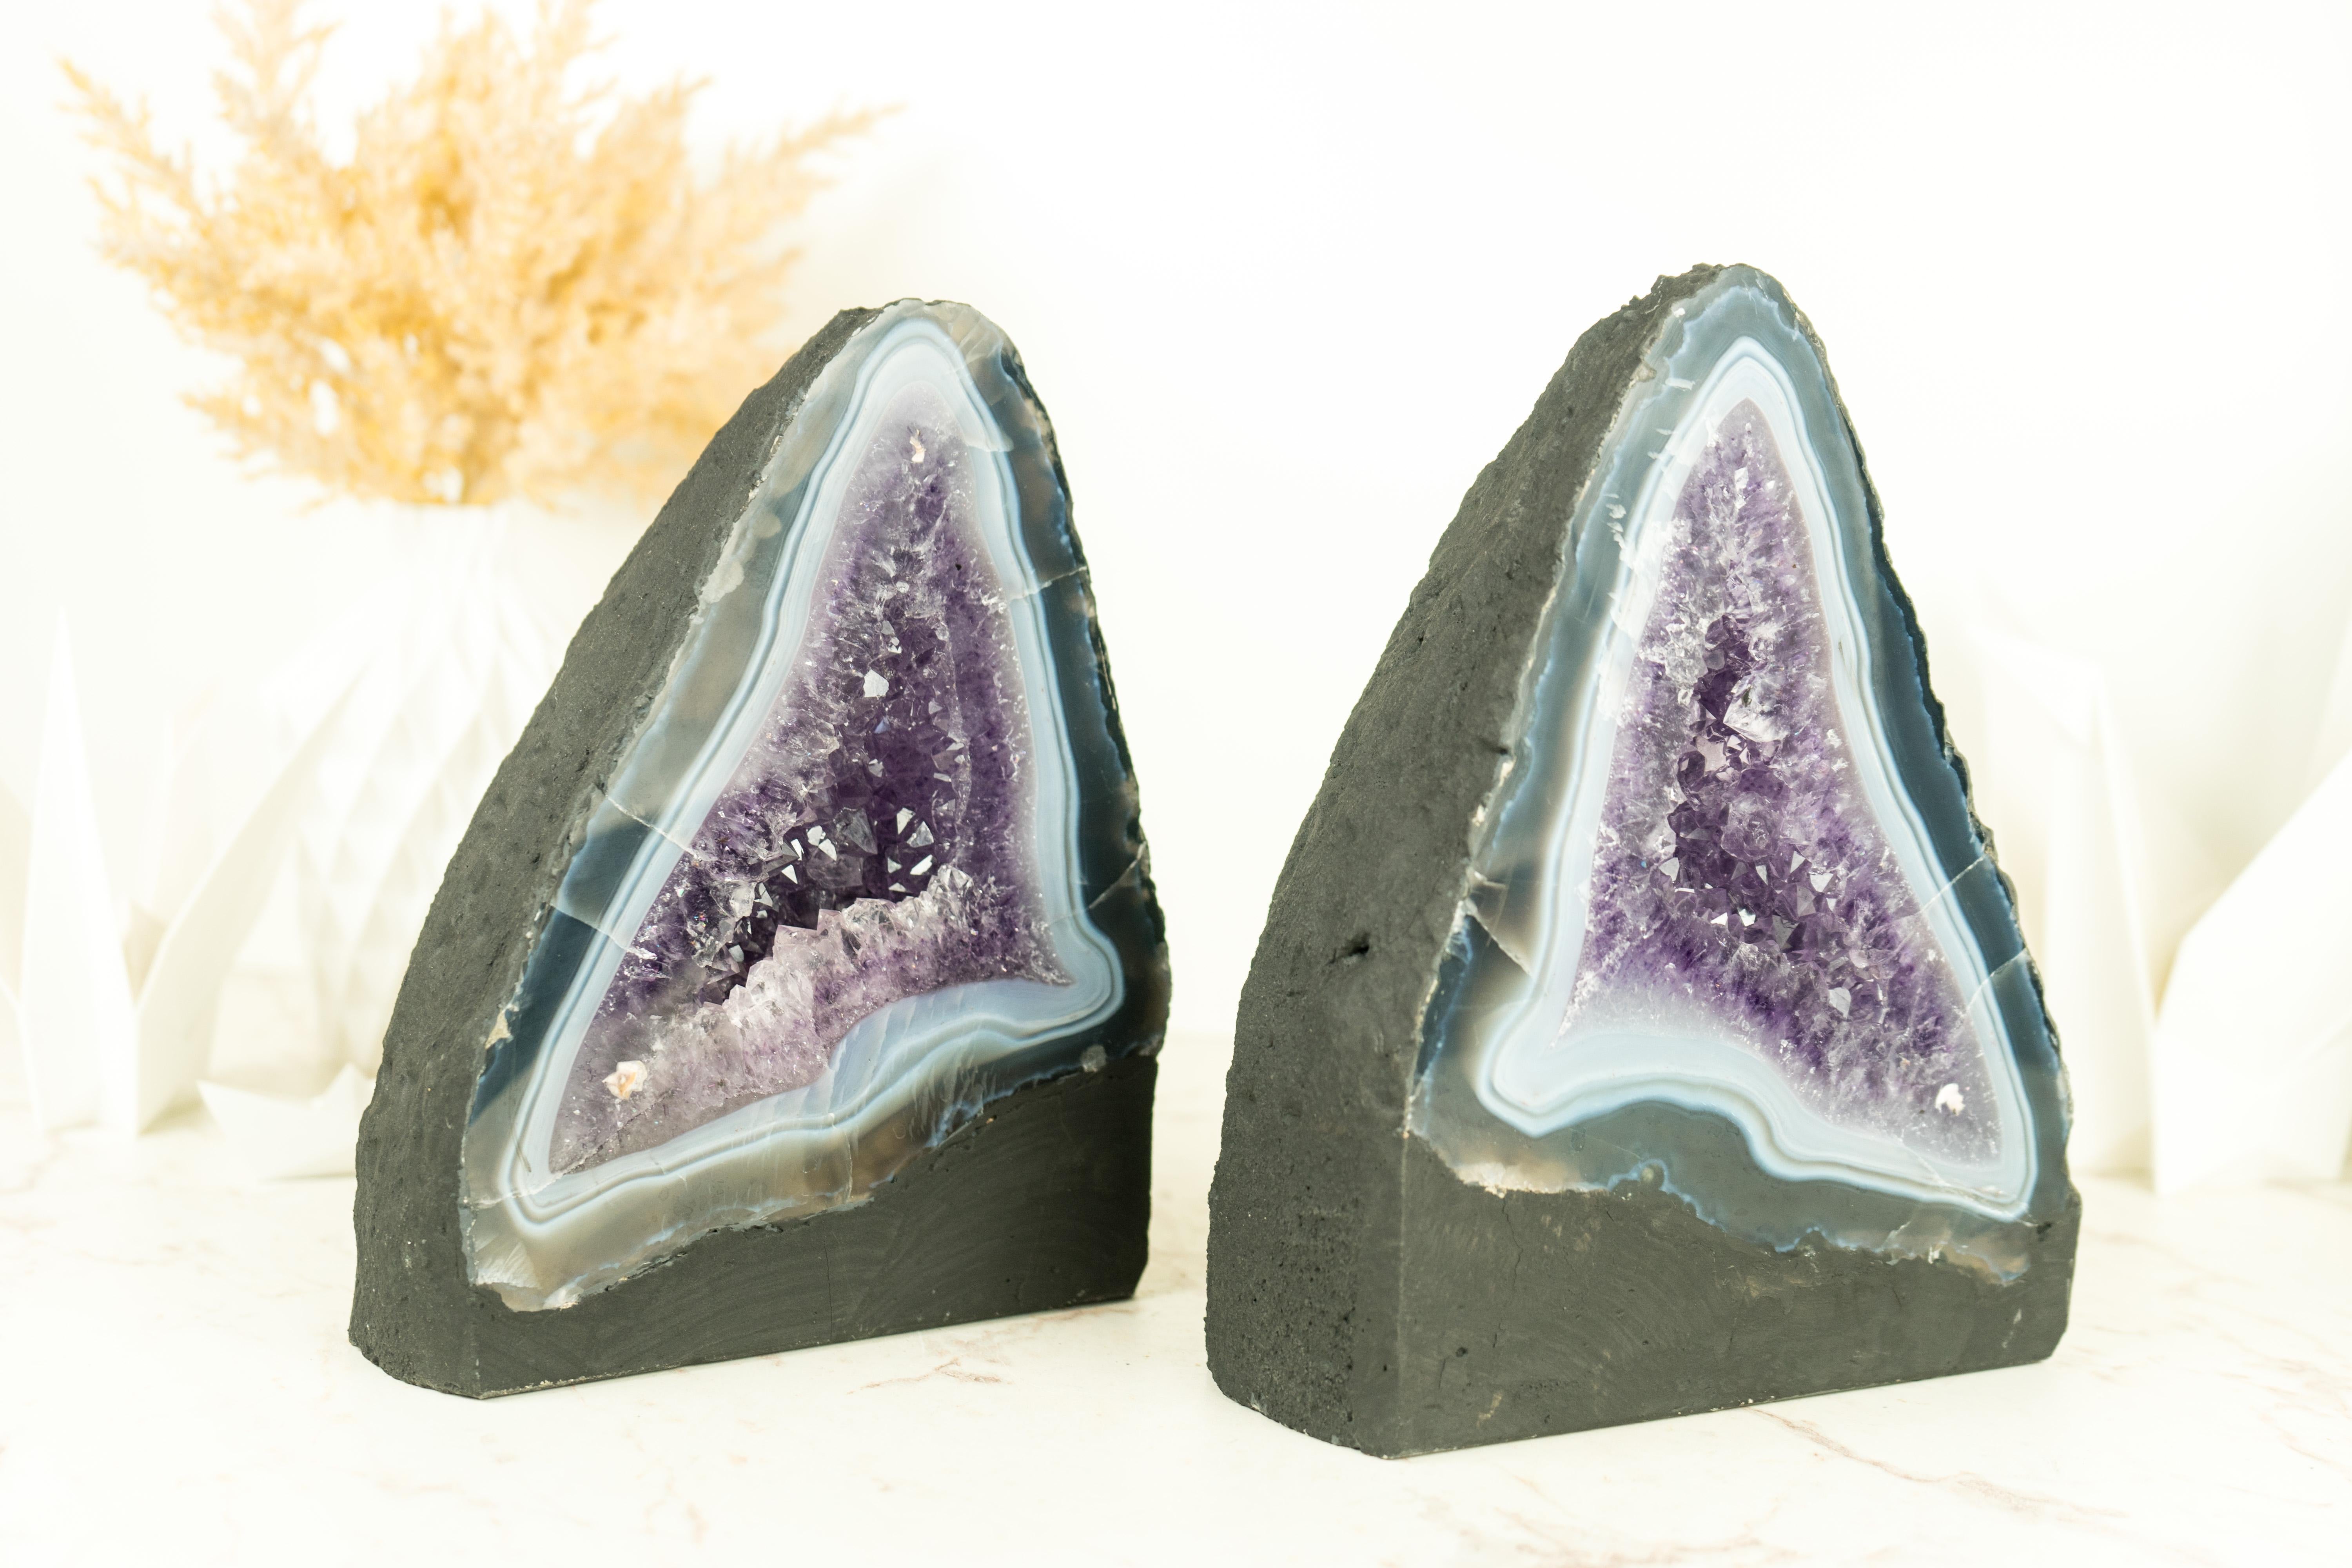 Pair of Book-Matching Blue Lace Agate Geodes with Crystal Amethyst For Sale 7